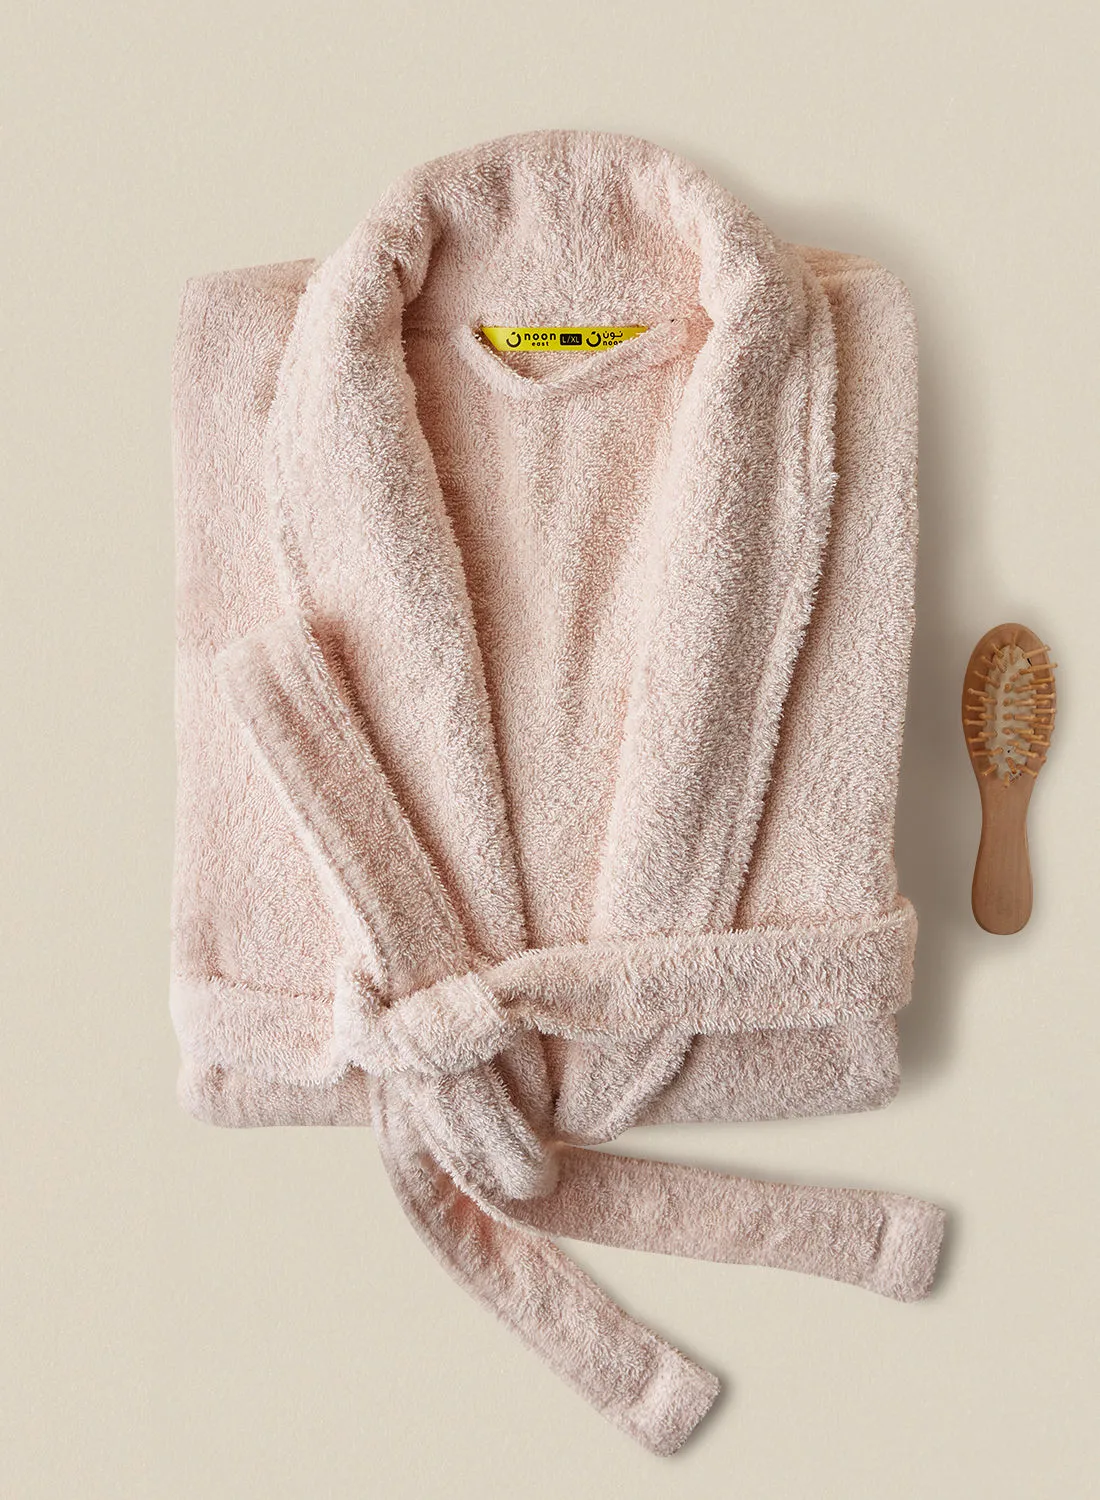 noon east Bathrobe - 380 GSM 100% Cotton Terry Silky Soft Spa Quality Comfort - Shawl Collar & Pocket - Peach Color - 1 Piece